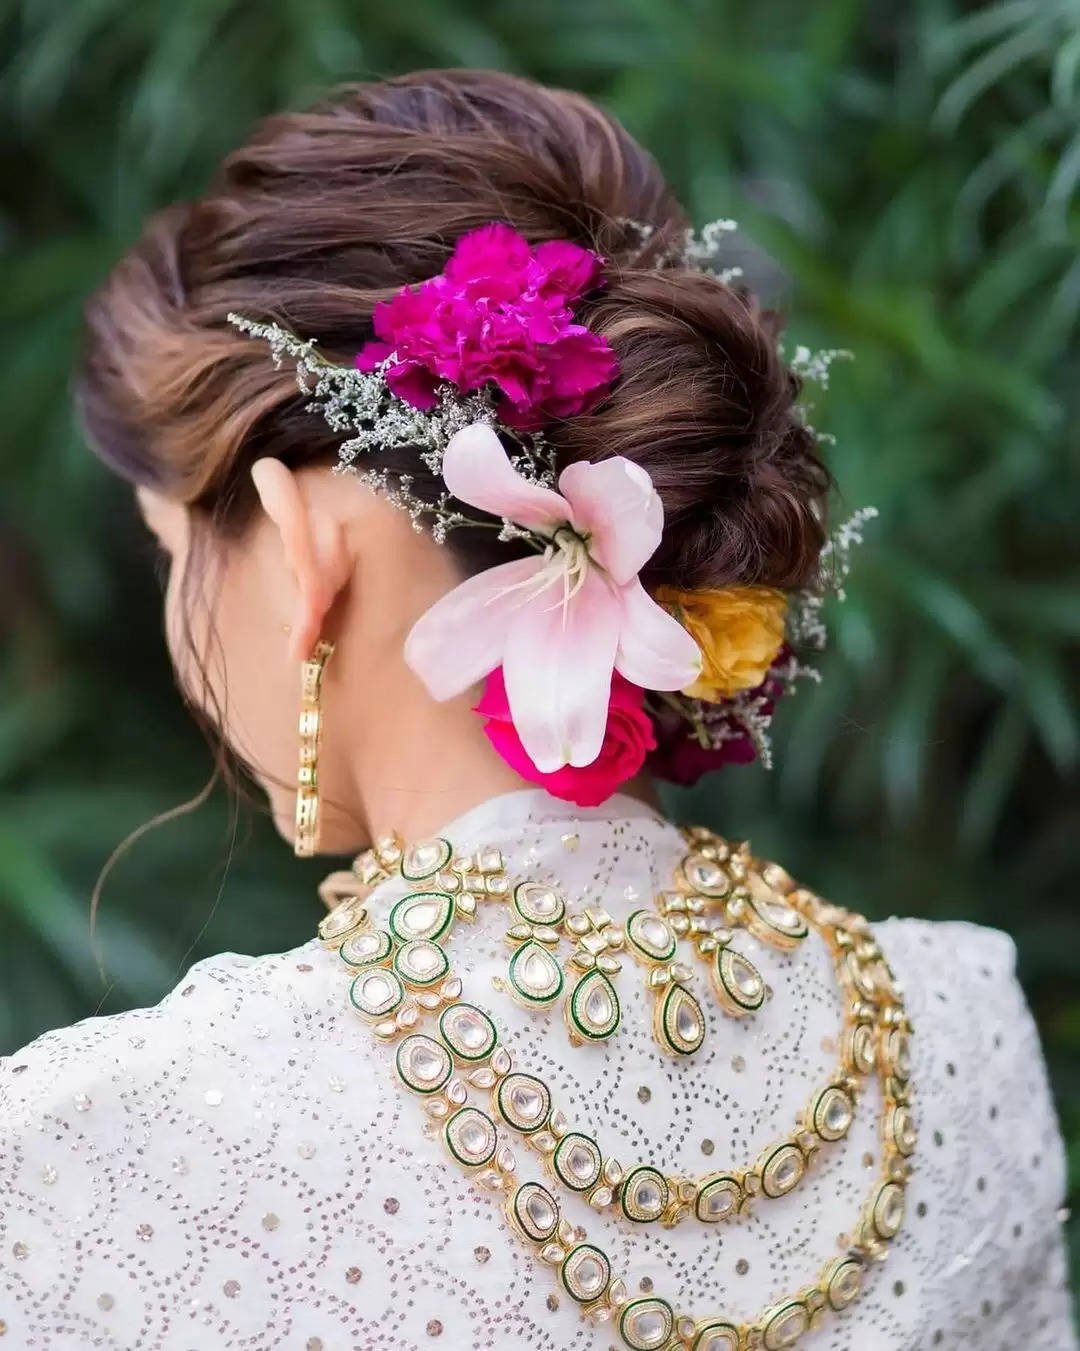 Bridal Hairstyling Ideas For Selecting The Proper Equipment